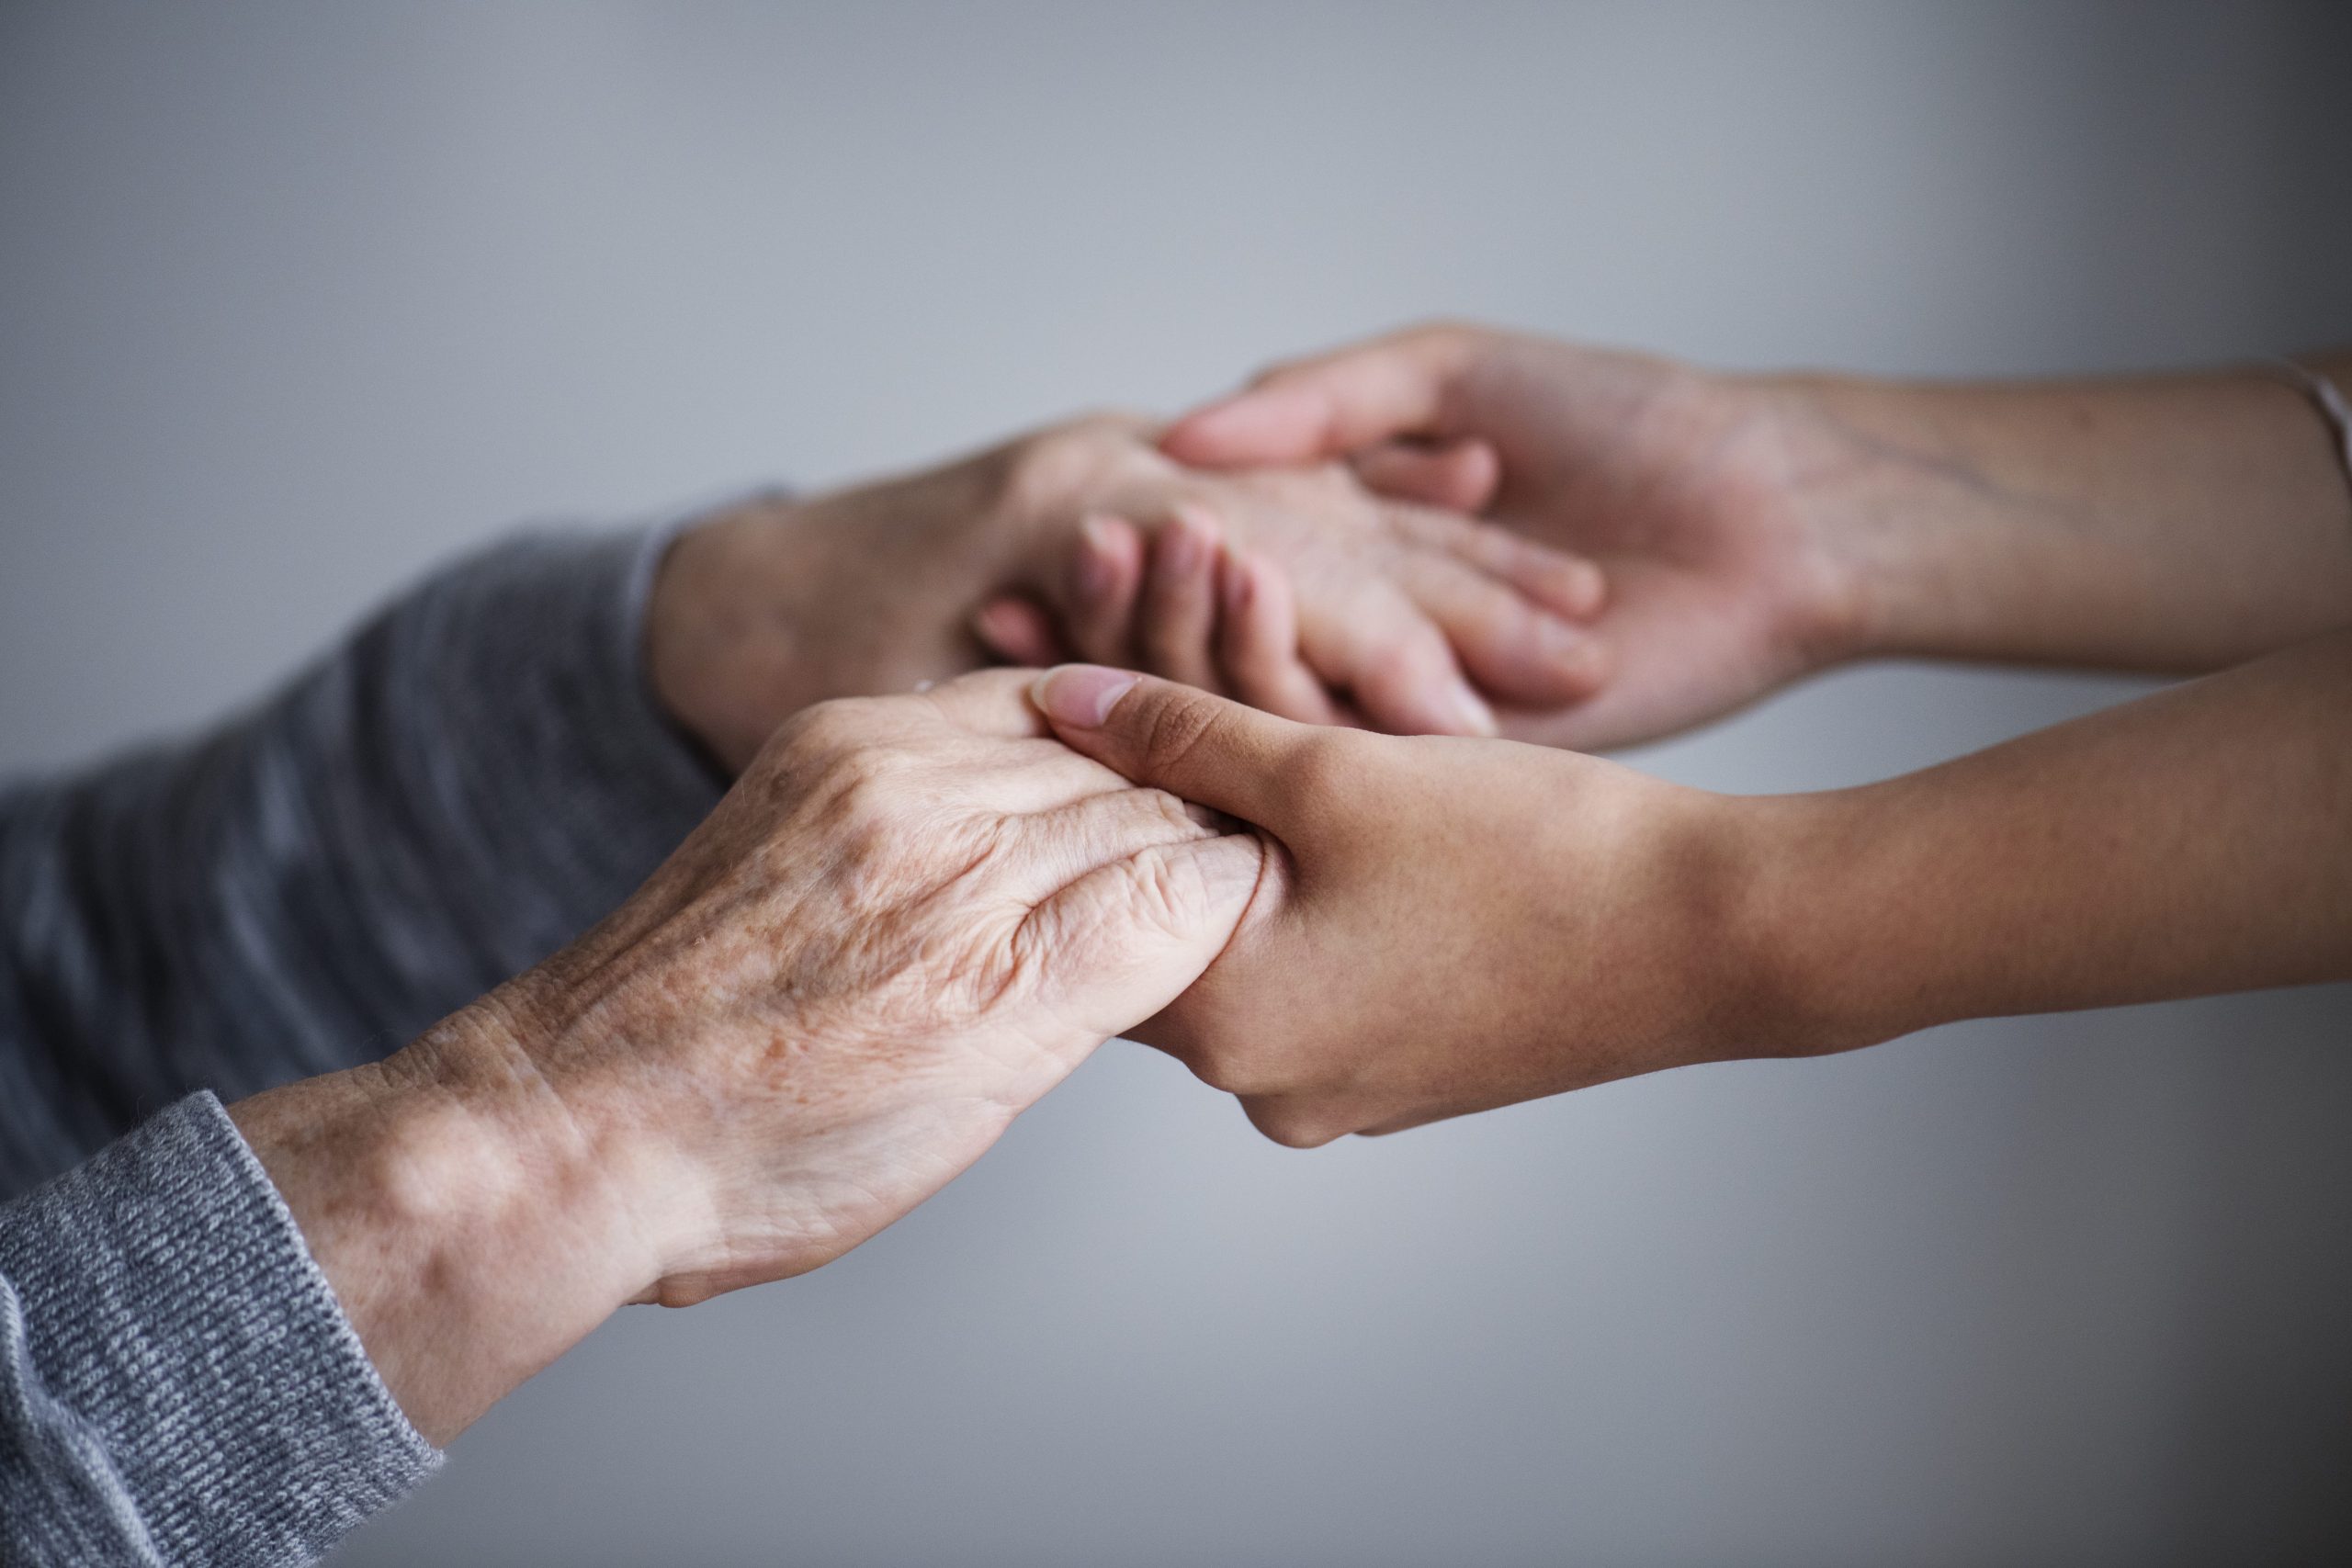 Making Wise End-of-Life Care Decisions, Departing With Gratitude - Werner Law Firm